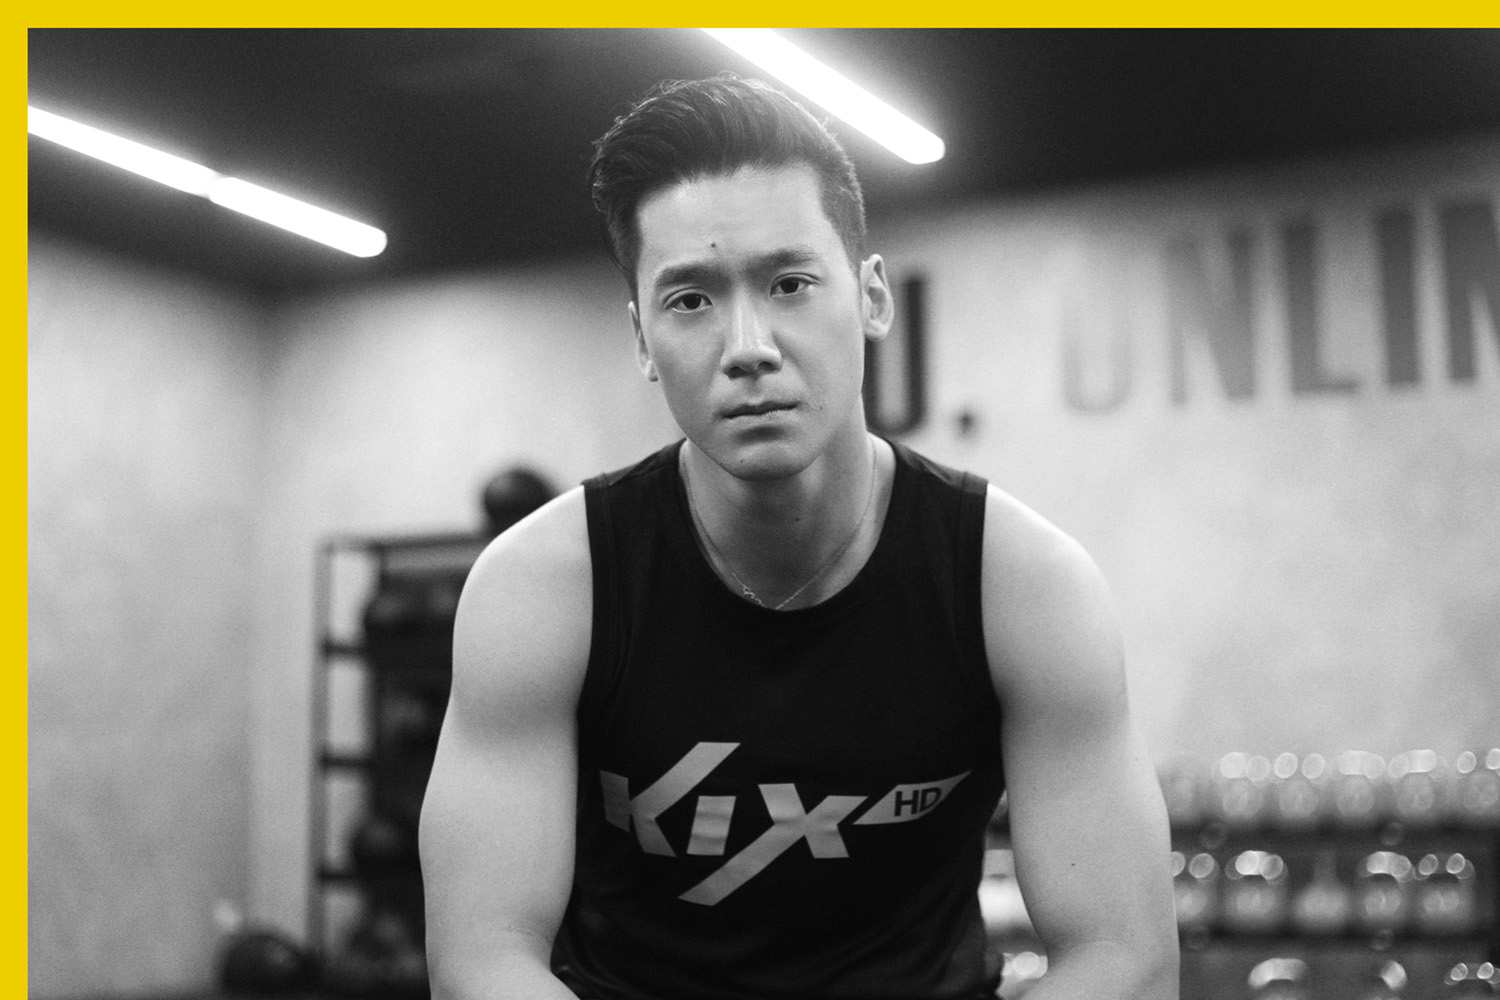 Joshua Tan on What It Takes to Be Mentally and Physically Tough